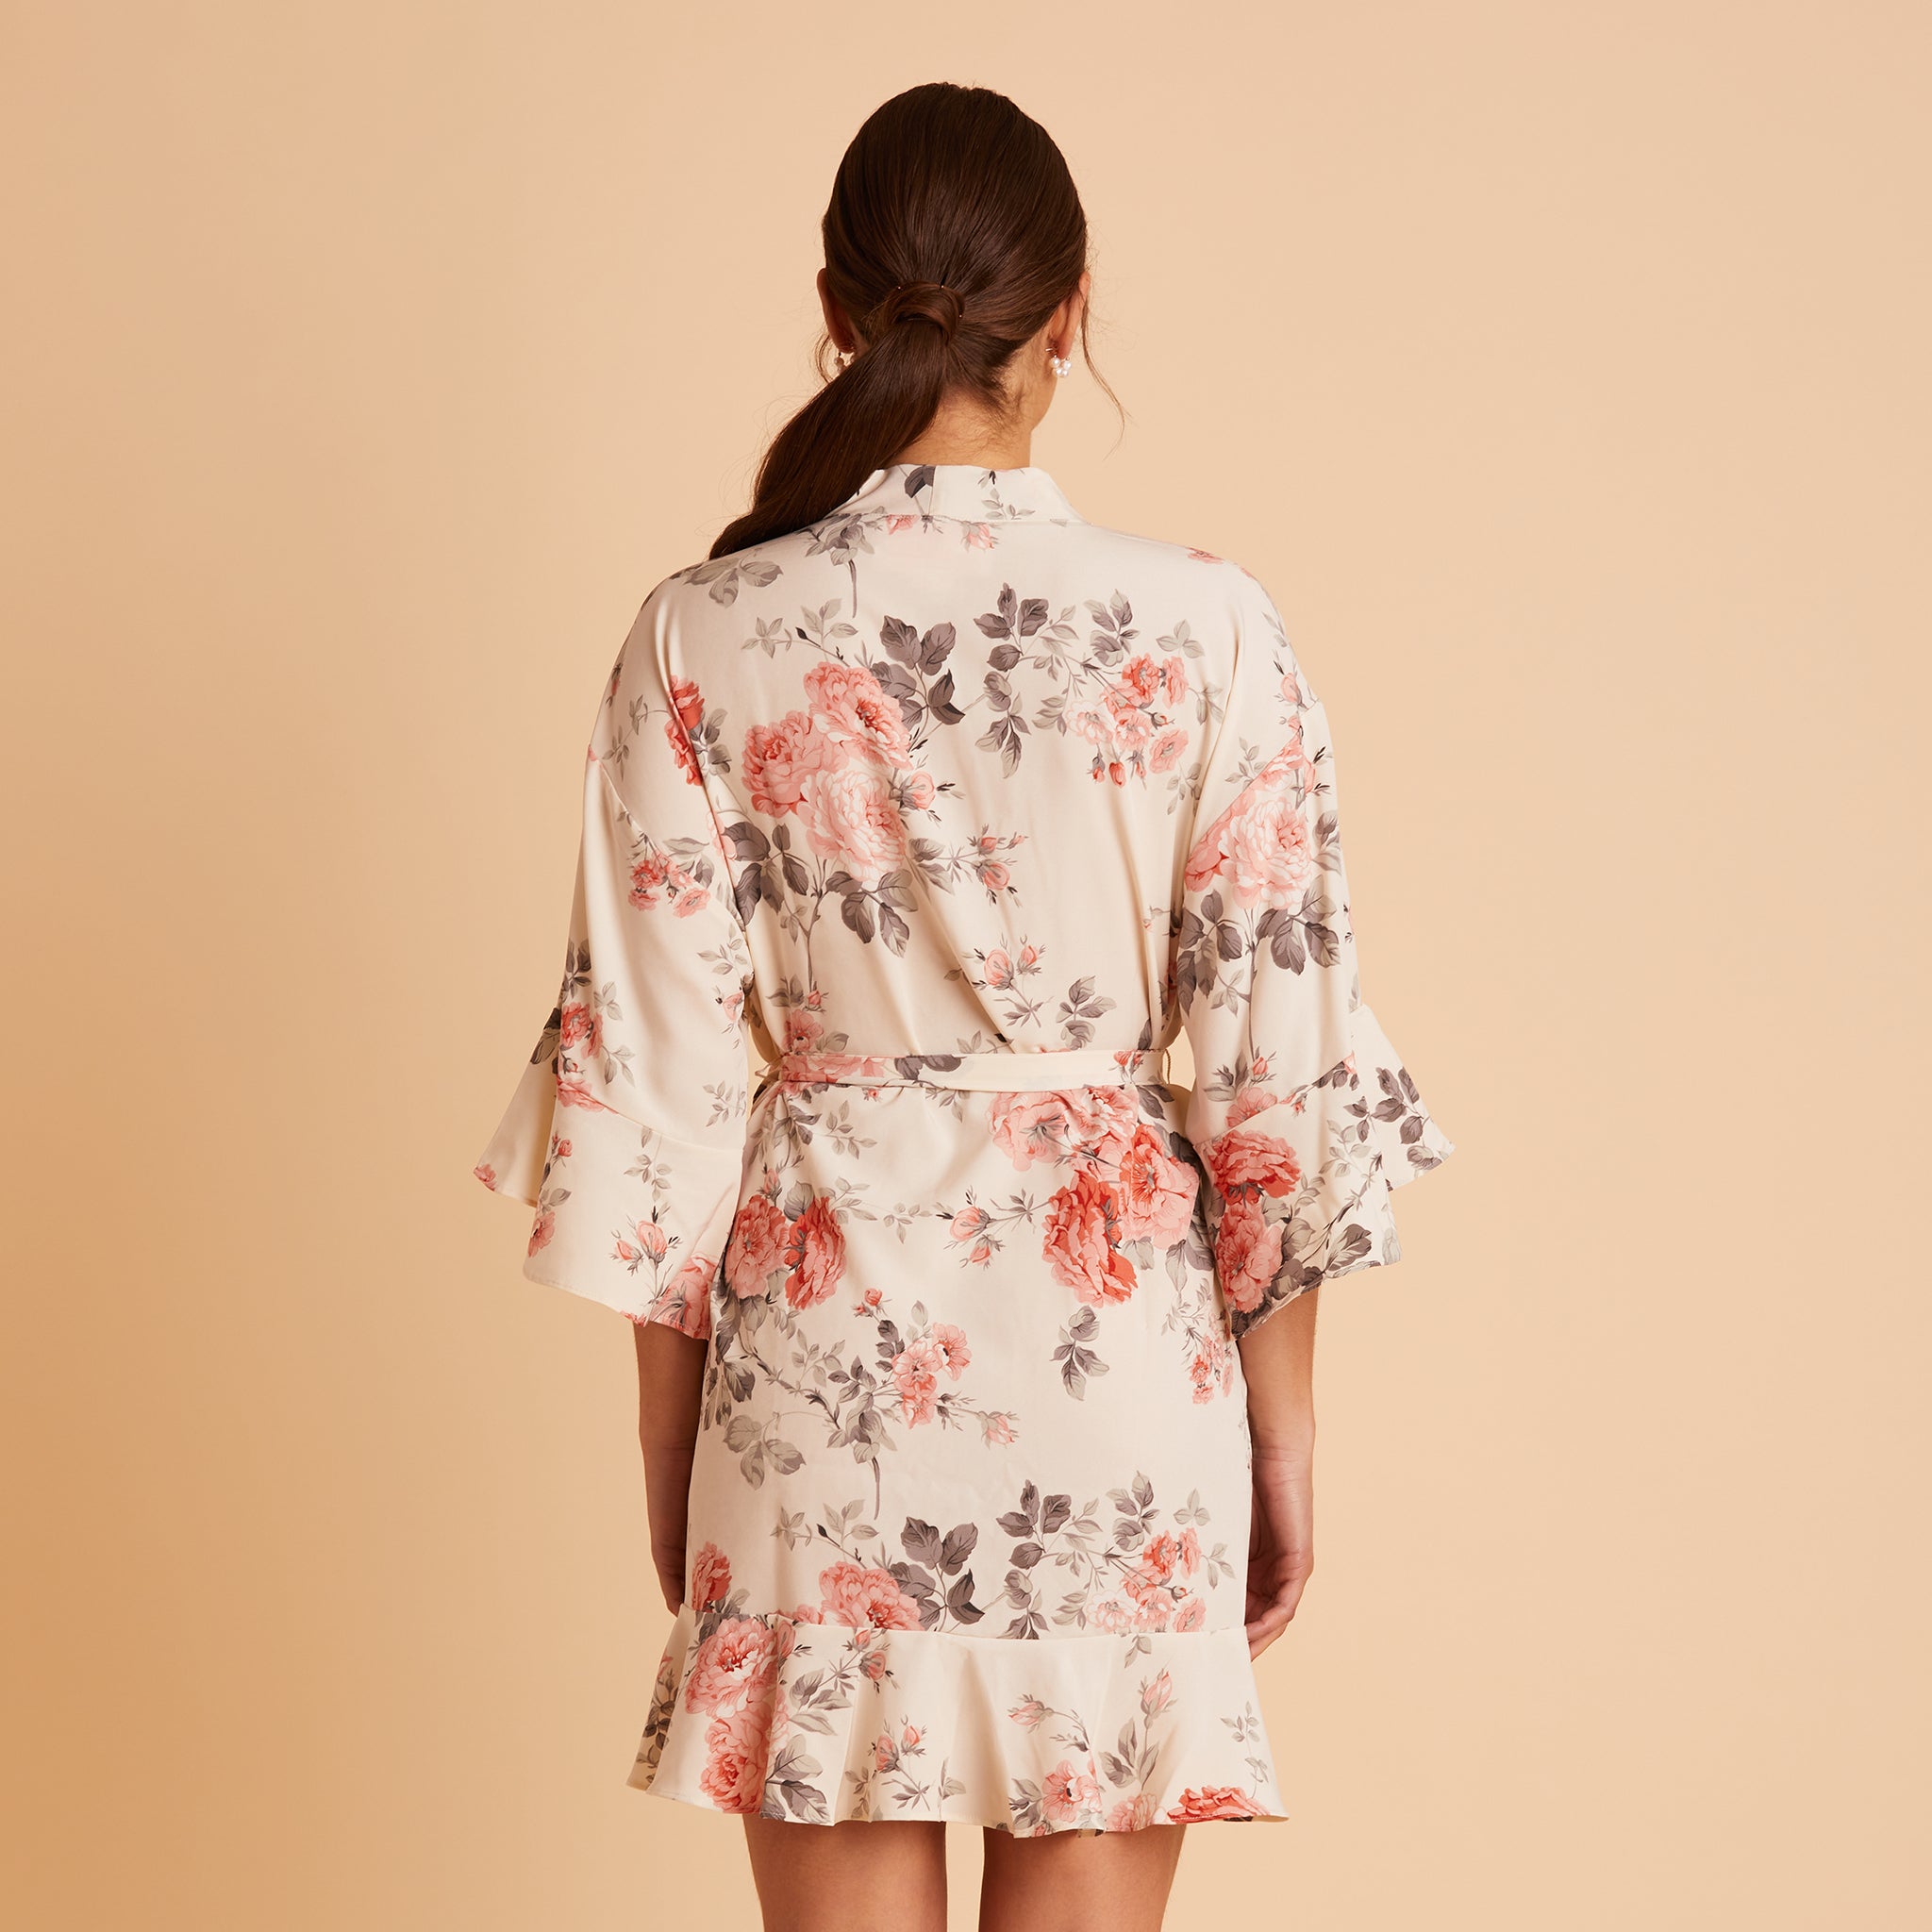 Kenny Ruffle Robe in Cream Floral by Birdy Grey, back view